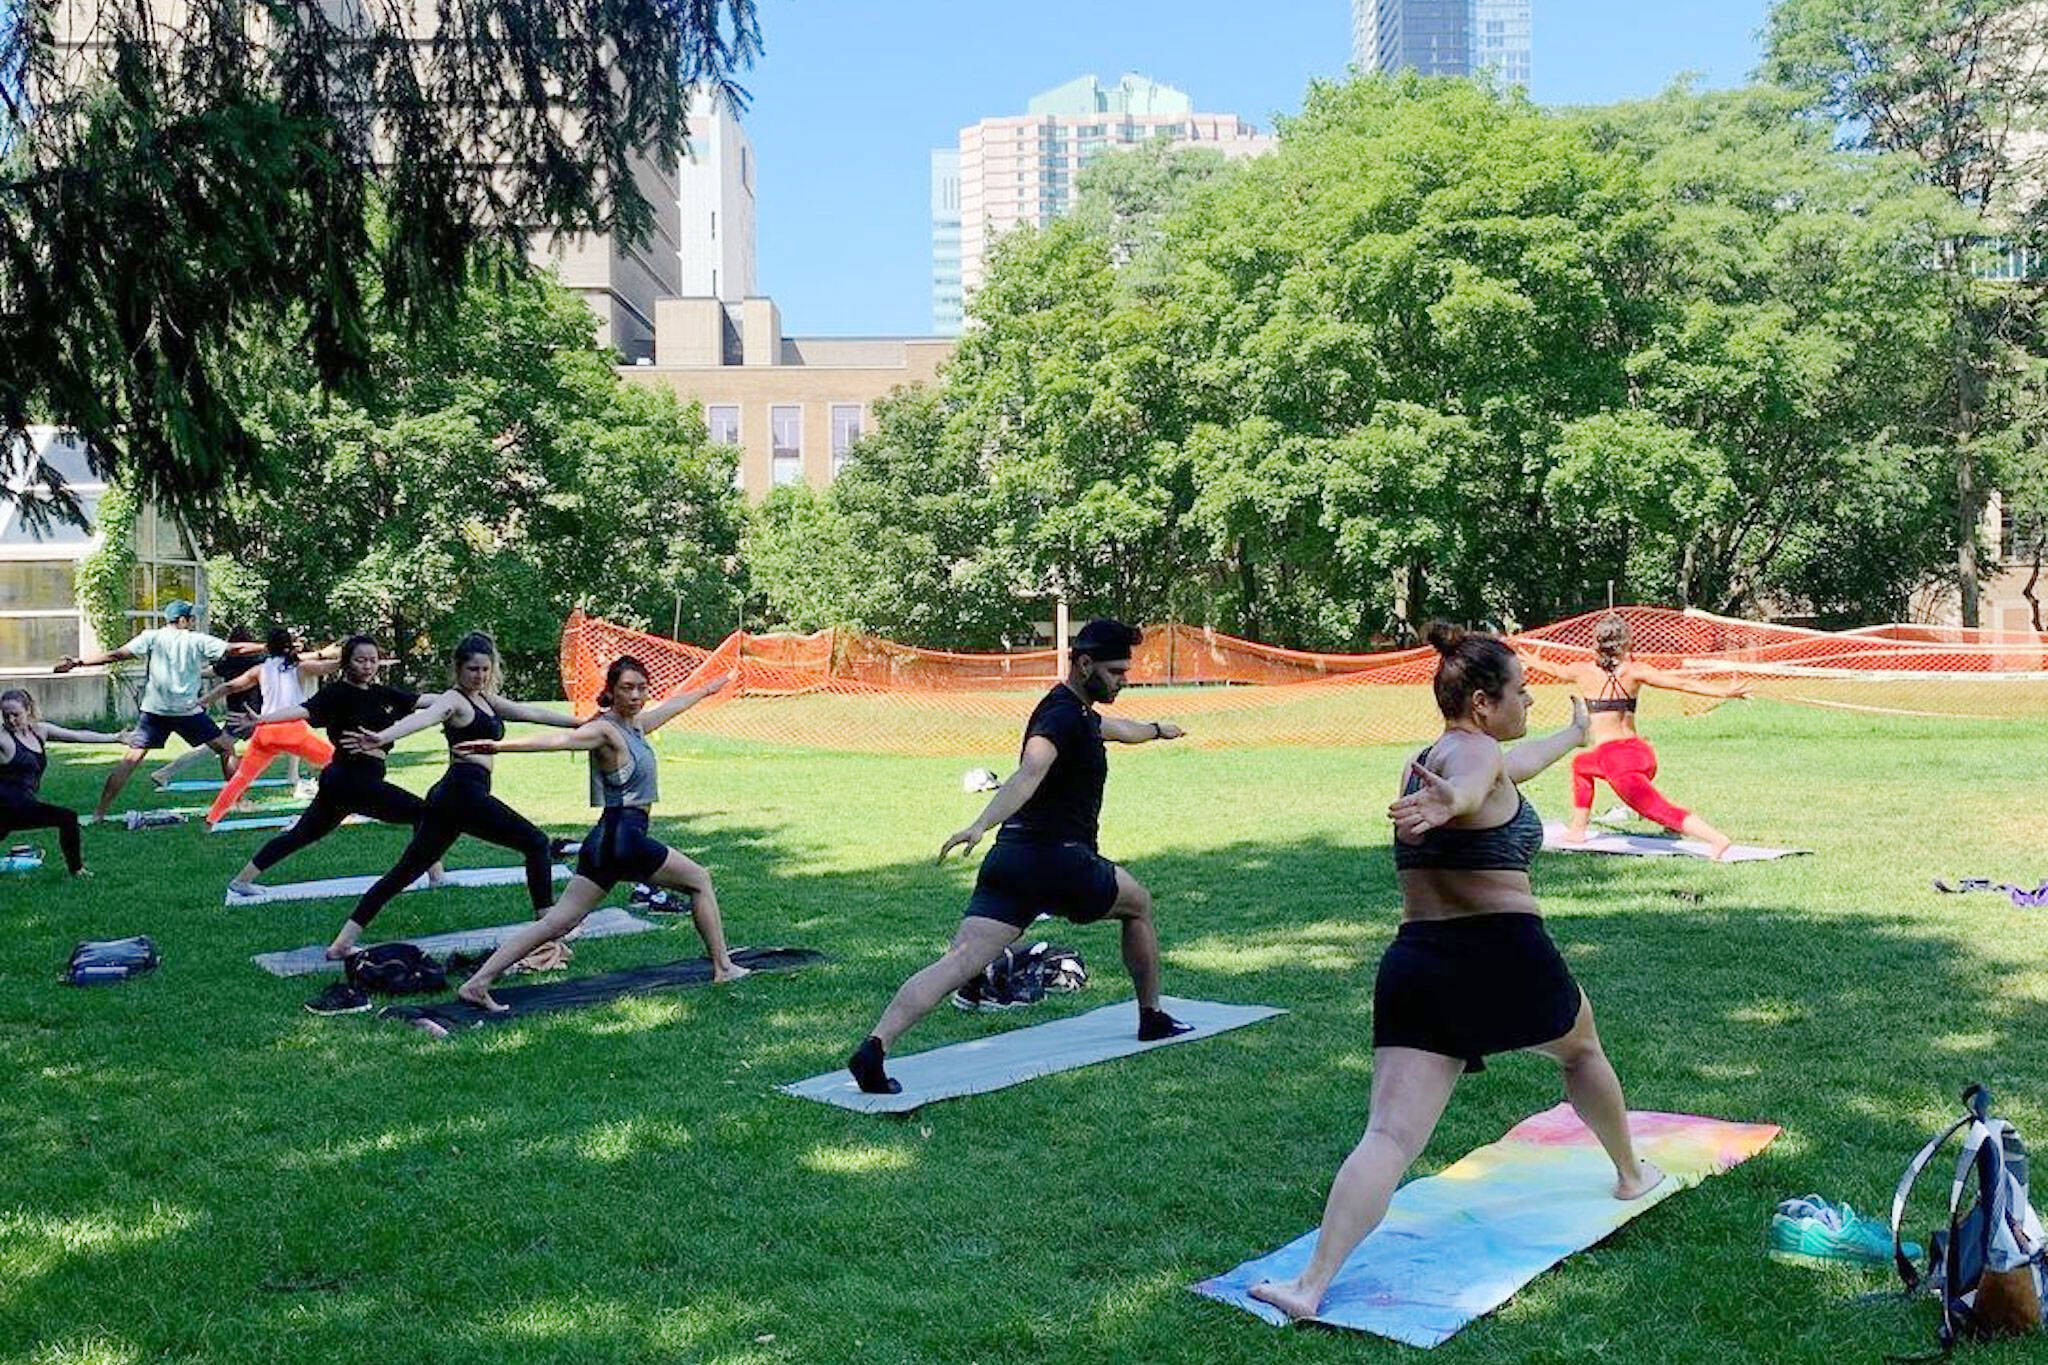 Outdoor fitness classes will soon be allowed again in Toronto